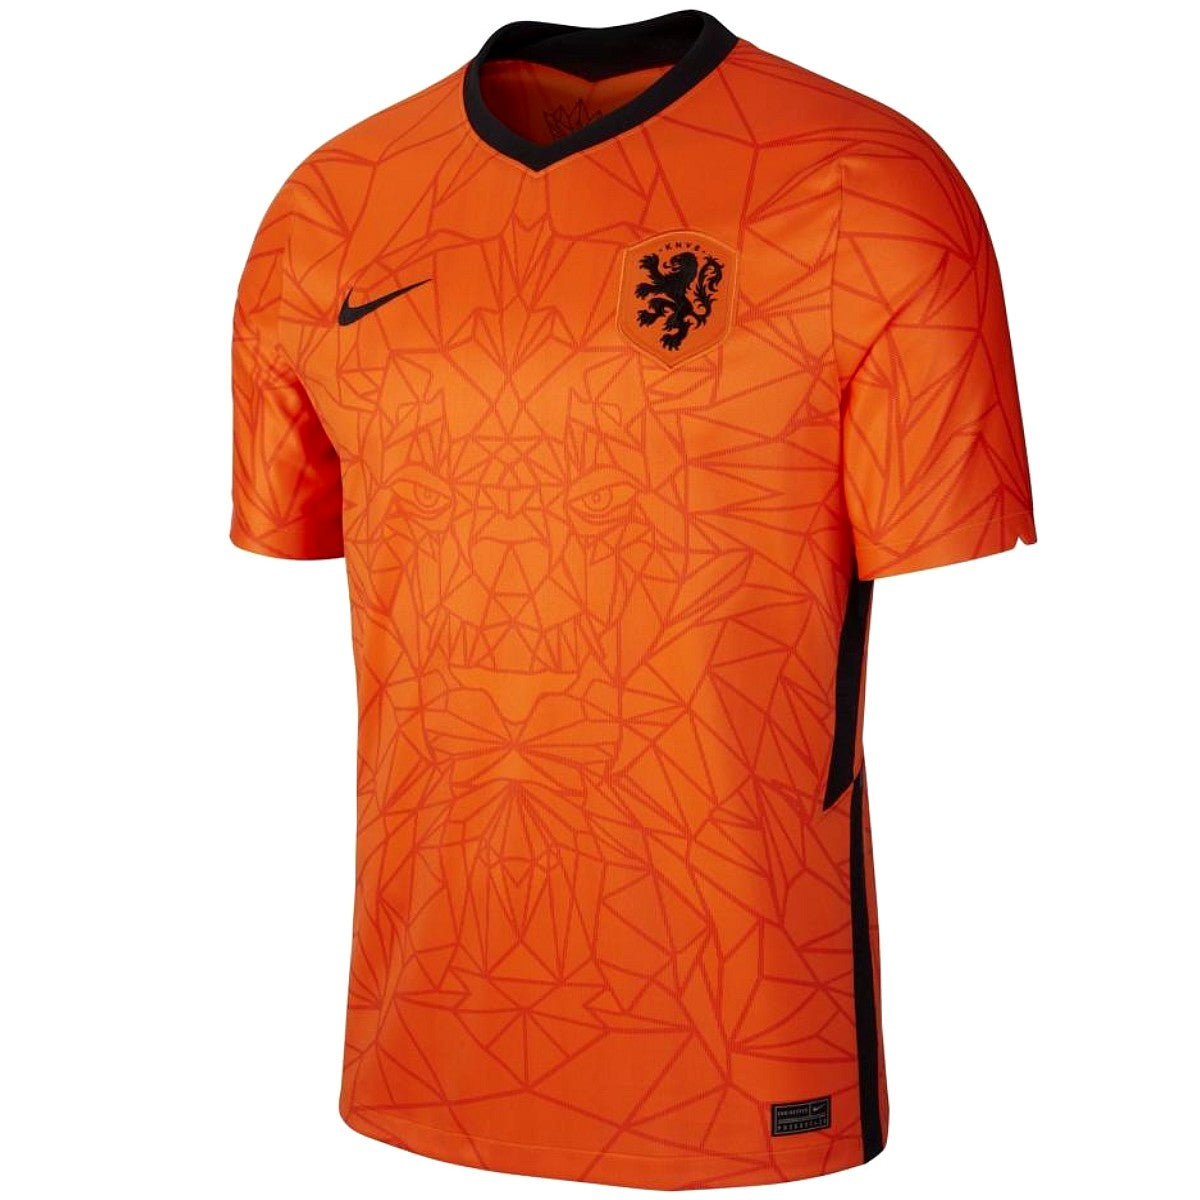 Nike Football World Cup 2022 Netherlands unisex home jersey in orange